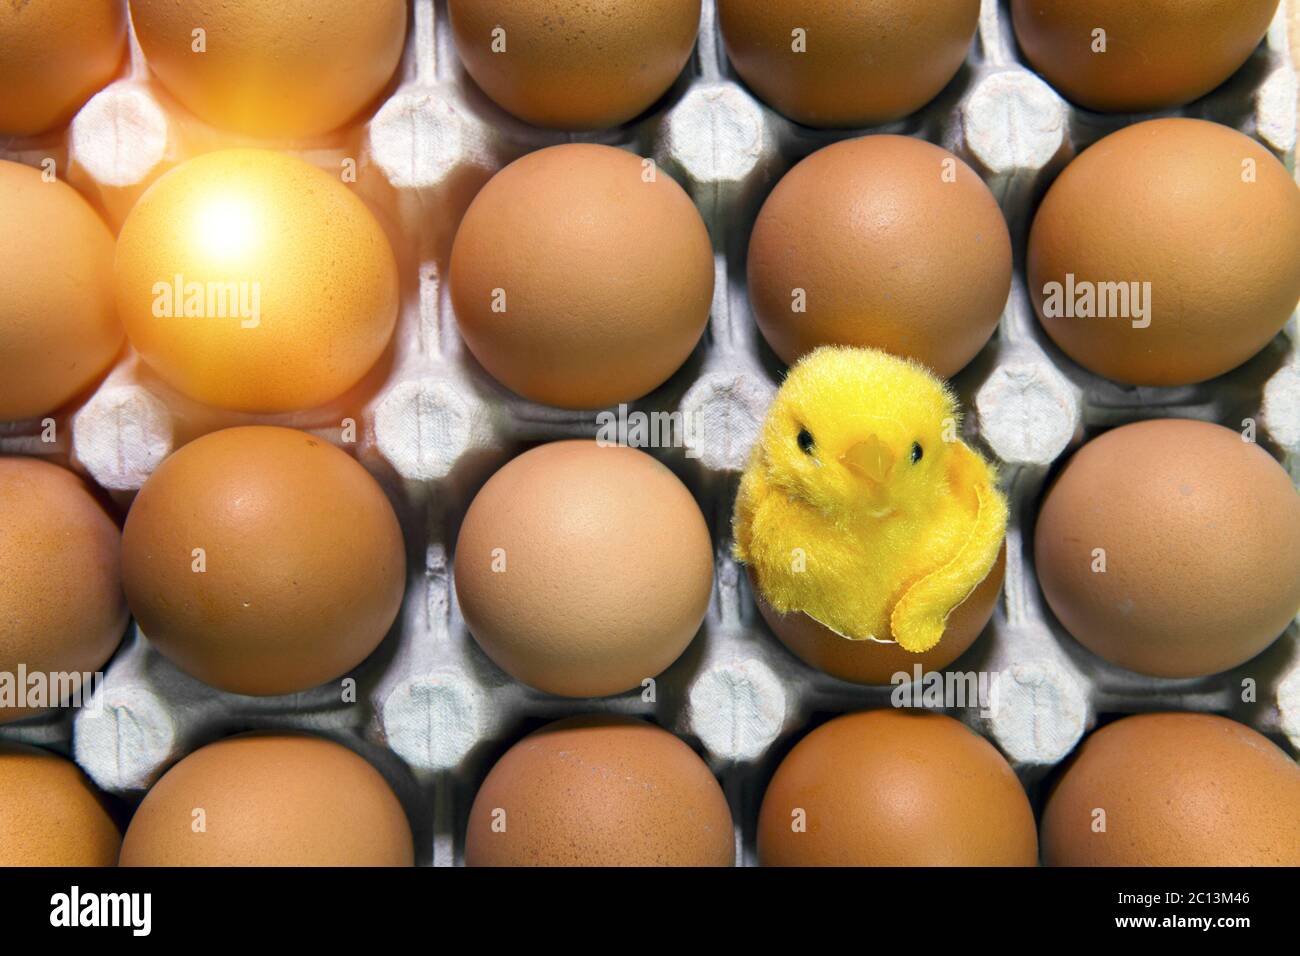 Toy chicken in shell of egg between eggs in packing Stock Photo